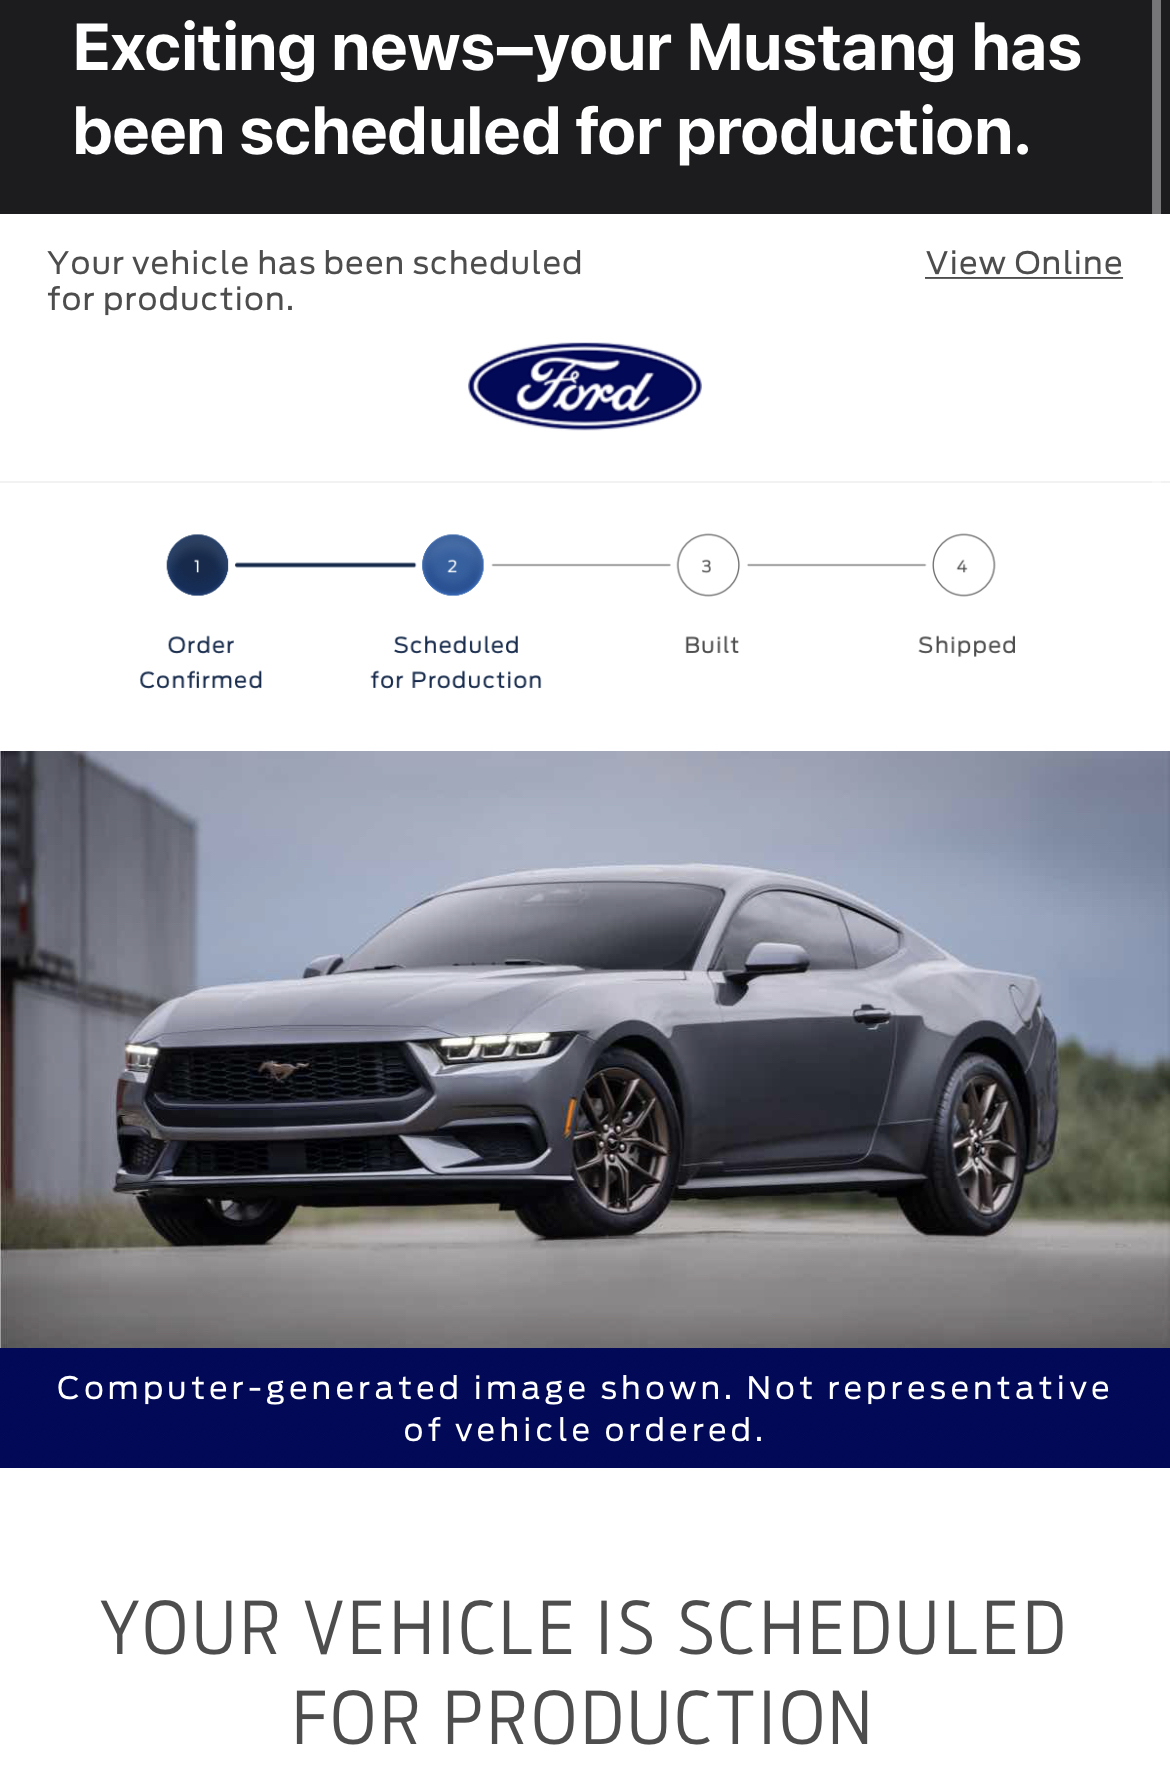 S650 Mustang Ah, this email haunts my inbox again. 0F8BFECB-9C88-48F7-8631-99ADE3282A9D